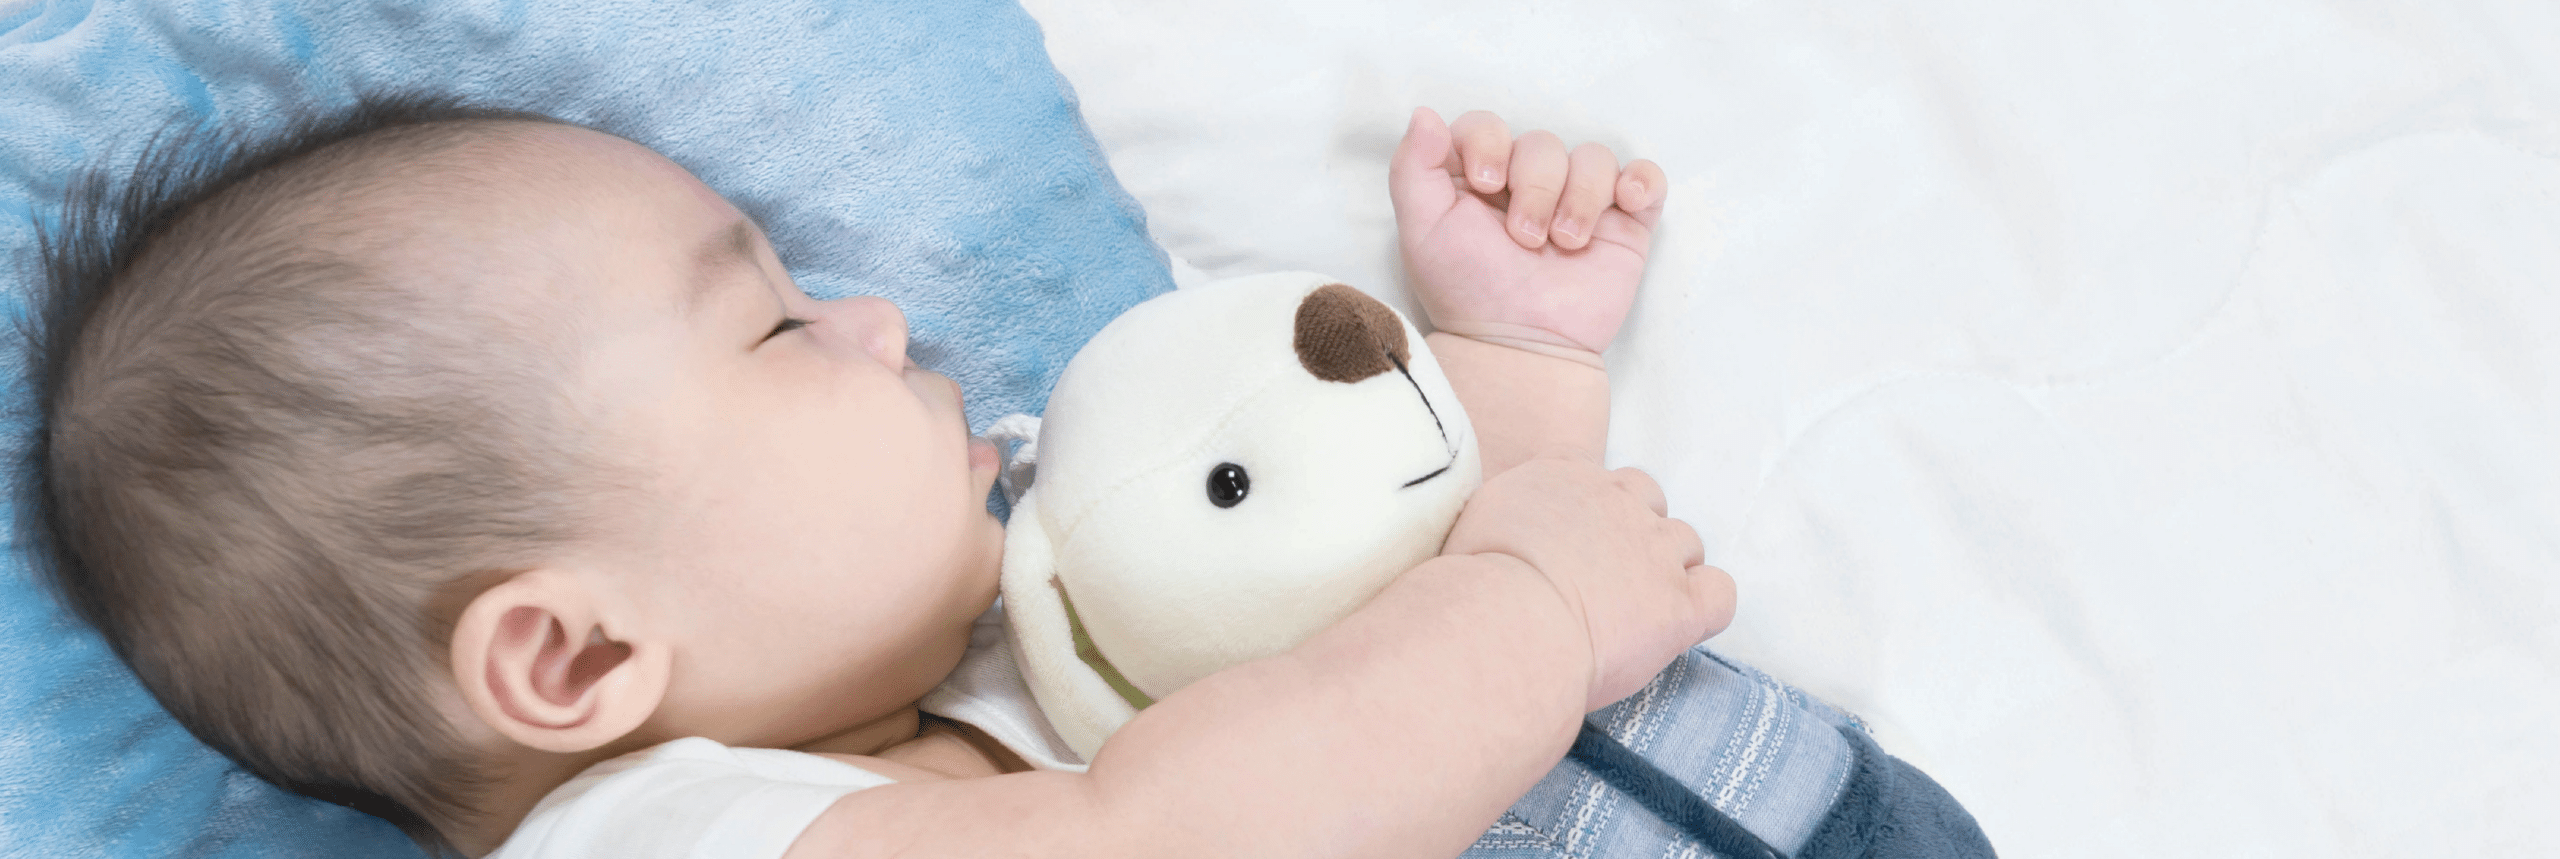 5 Reasons Why Sleep Is Essential For Babies